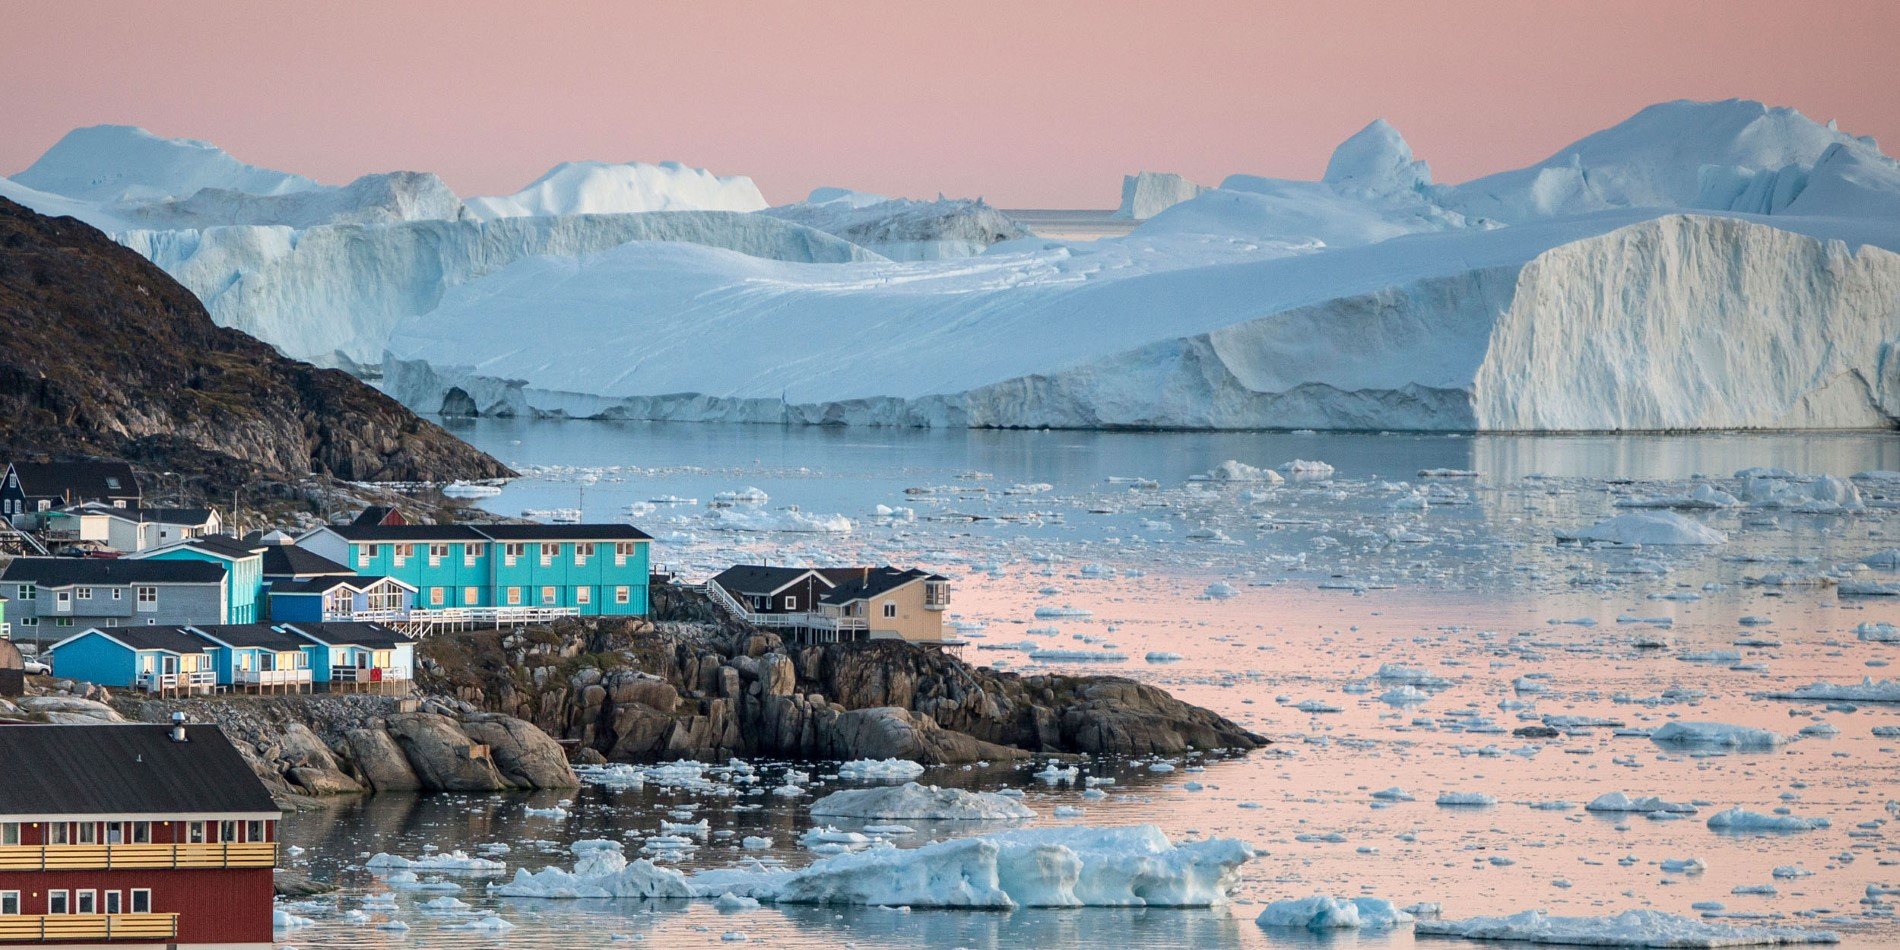 Ilulissat with the Icefjord